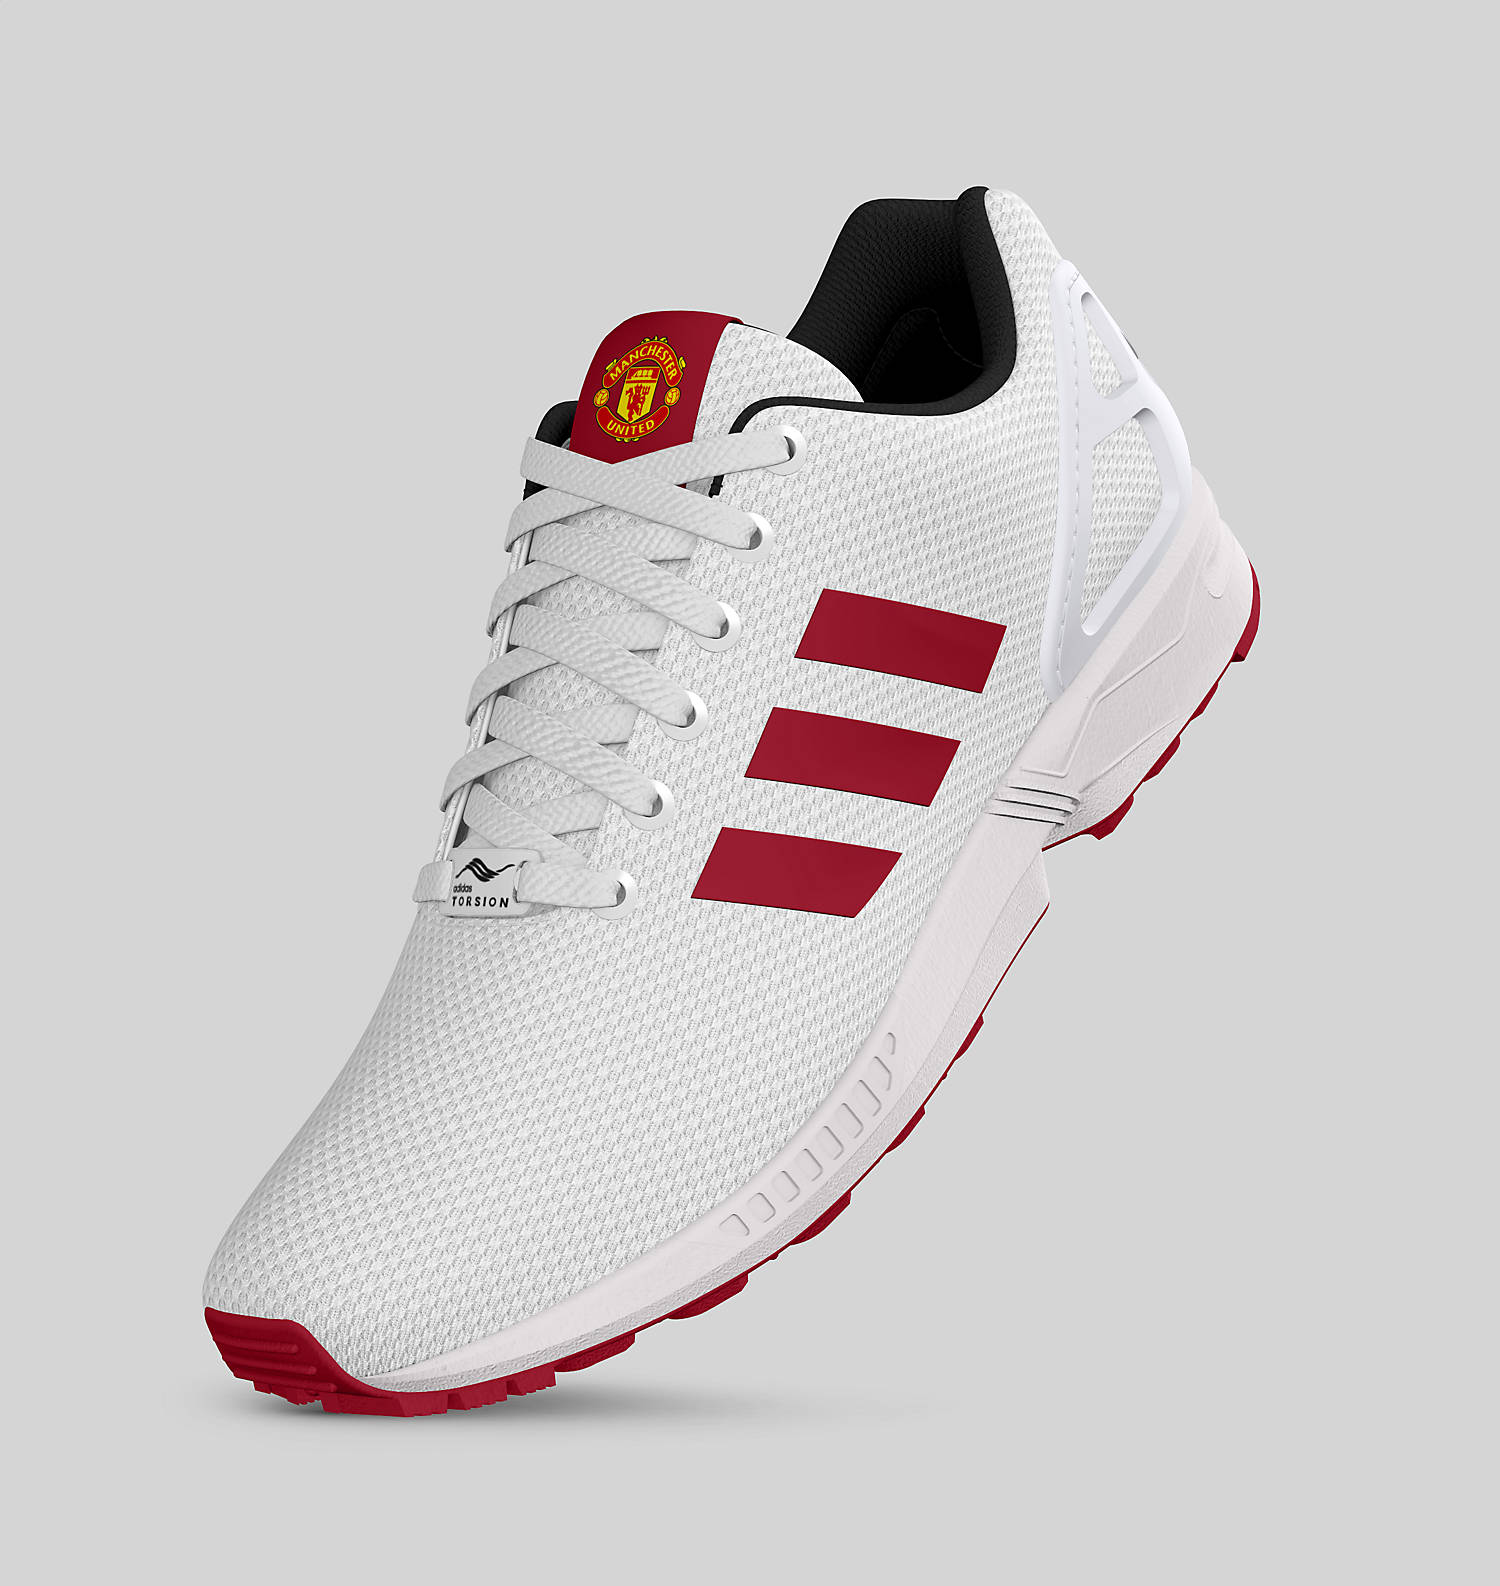 Useless Adidas mi Manchester  United  ZX Flux Shoes  